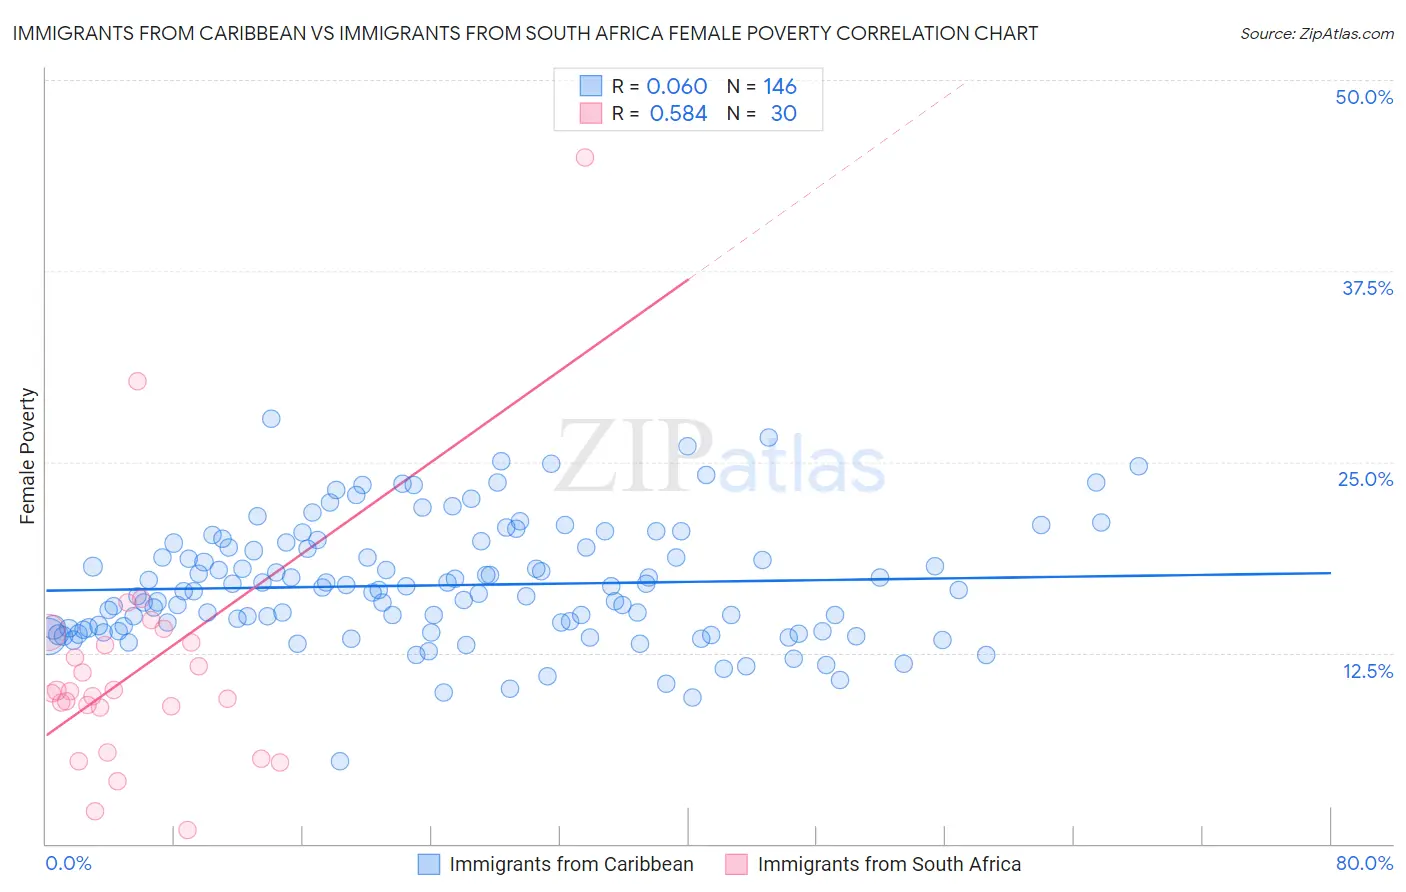 Immigrants from Caribbean vs Immigrants from South Africa Female Poverty